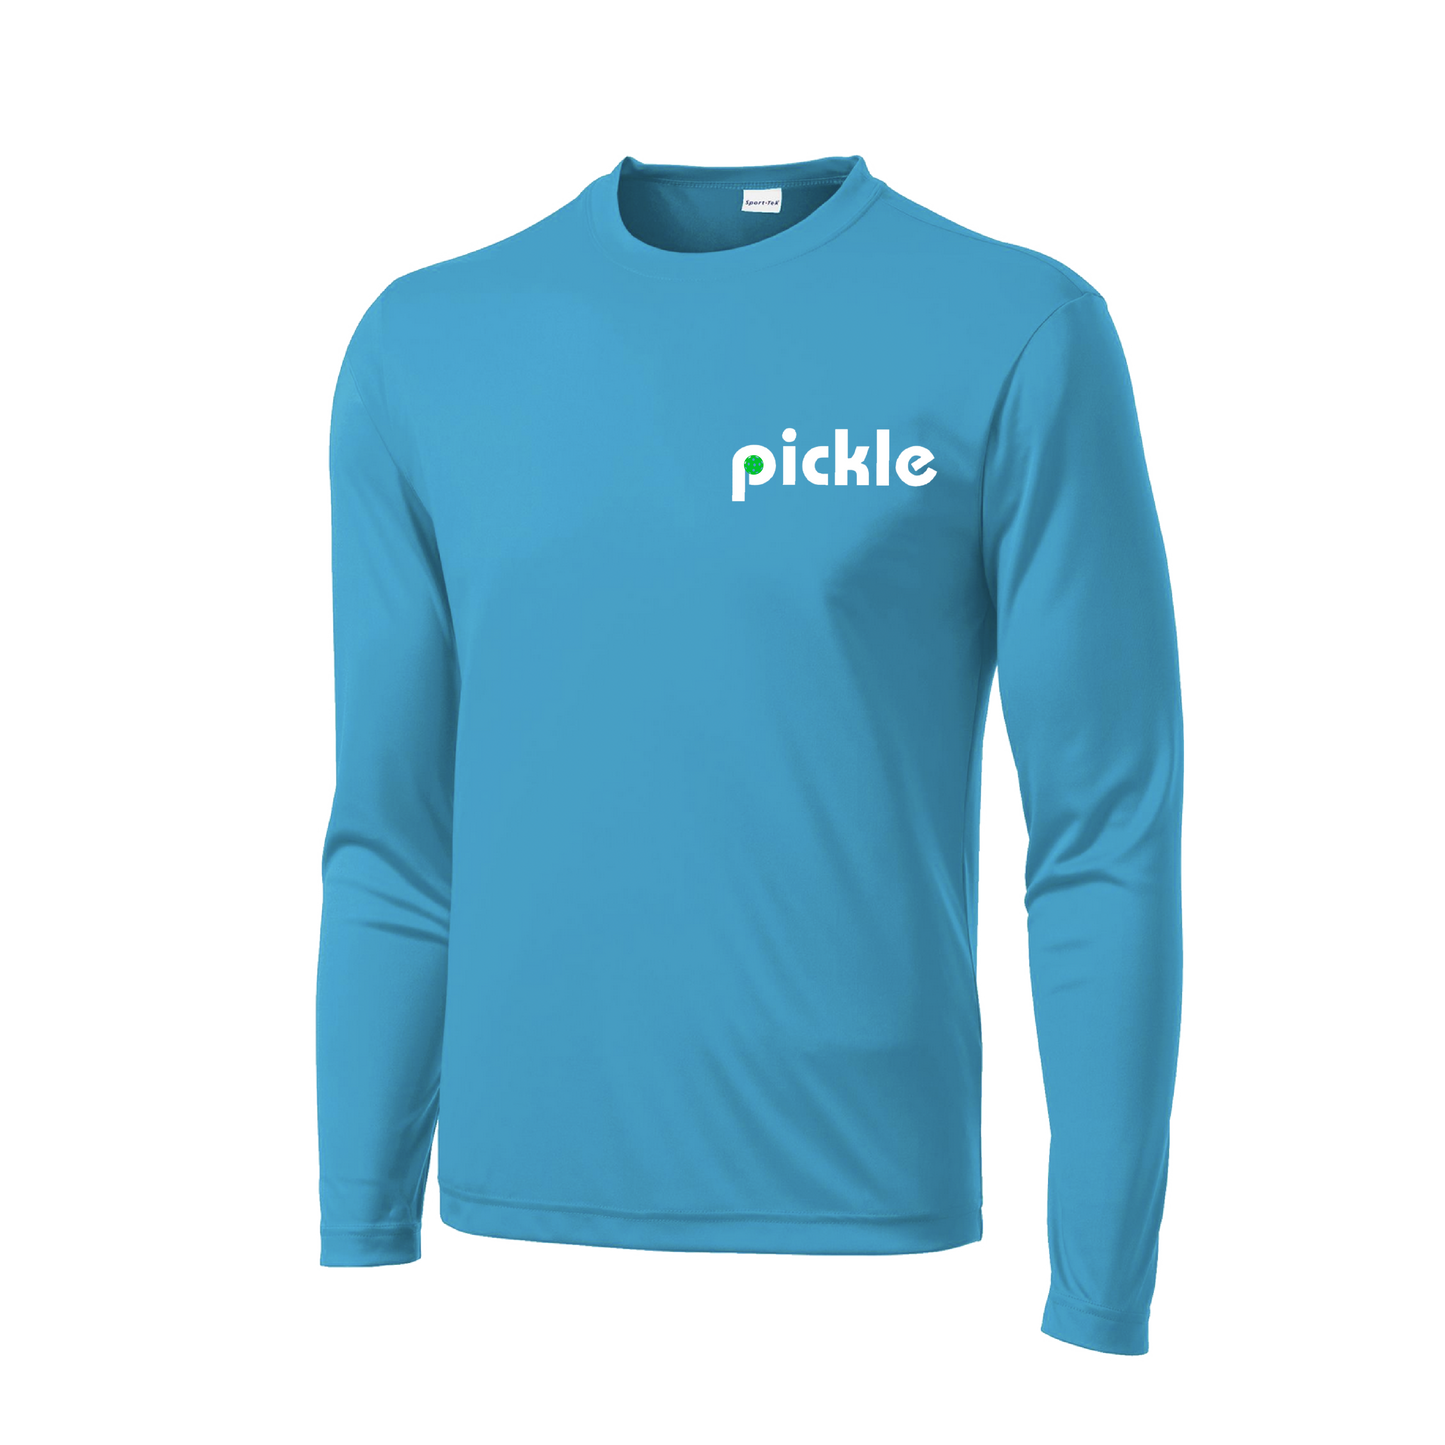 Pickle (Customizable) | Men's Long Sleeve Athletic Shirt | 100% Polyester